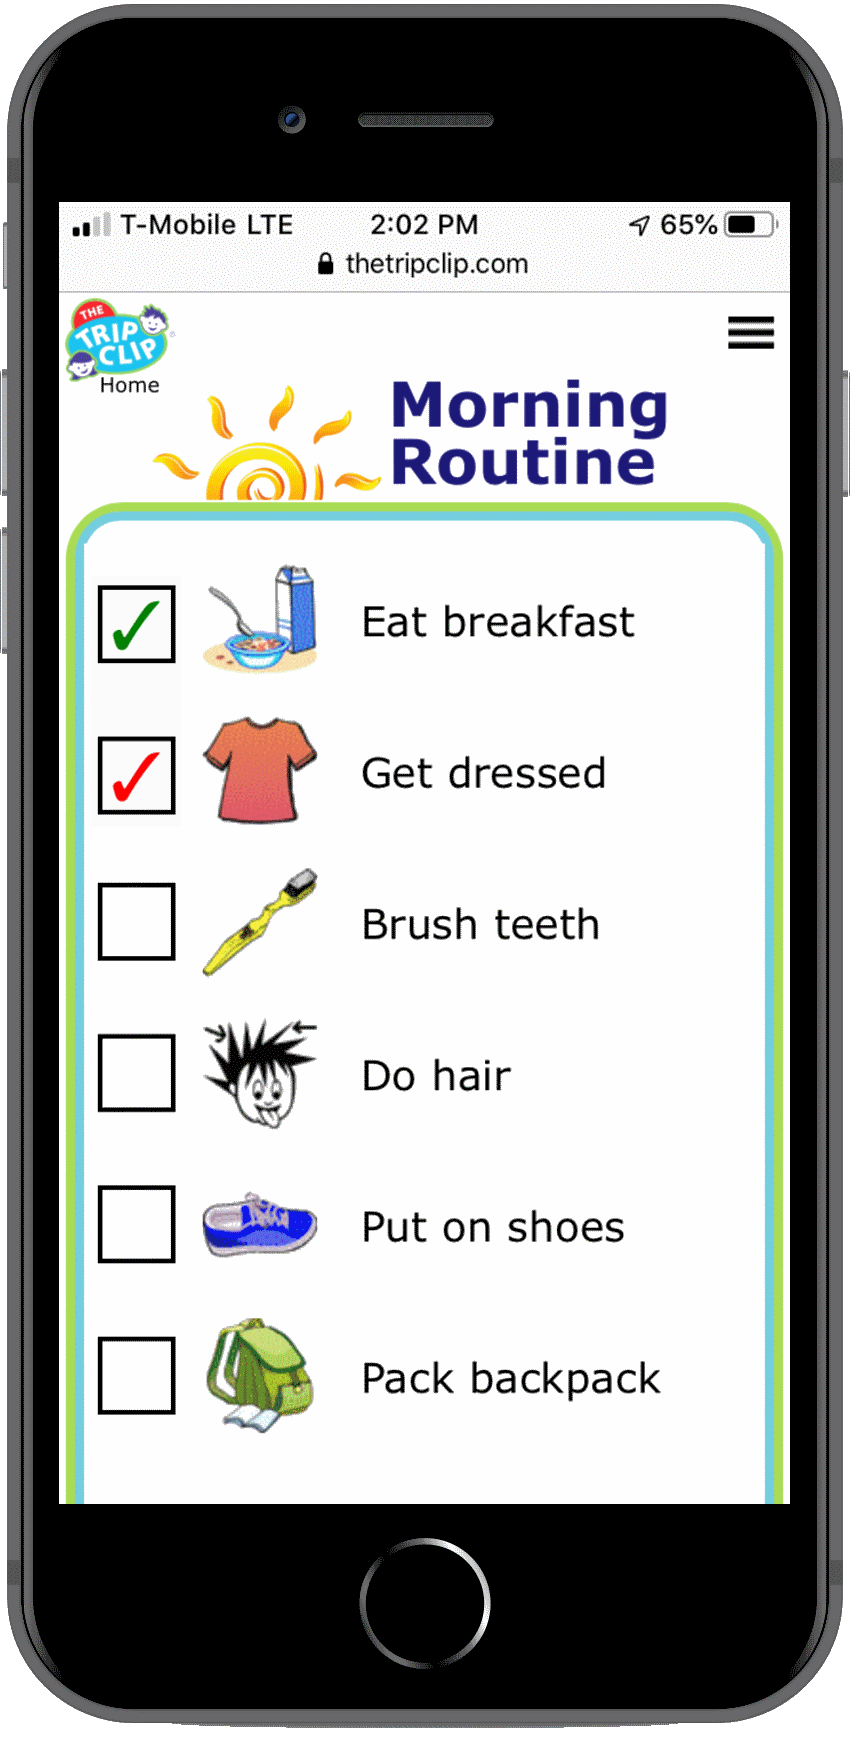 Morning routine picture checklist for kids on an iphone